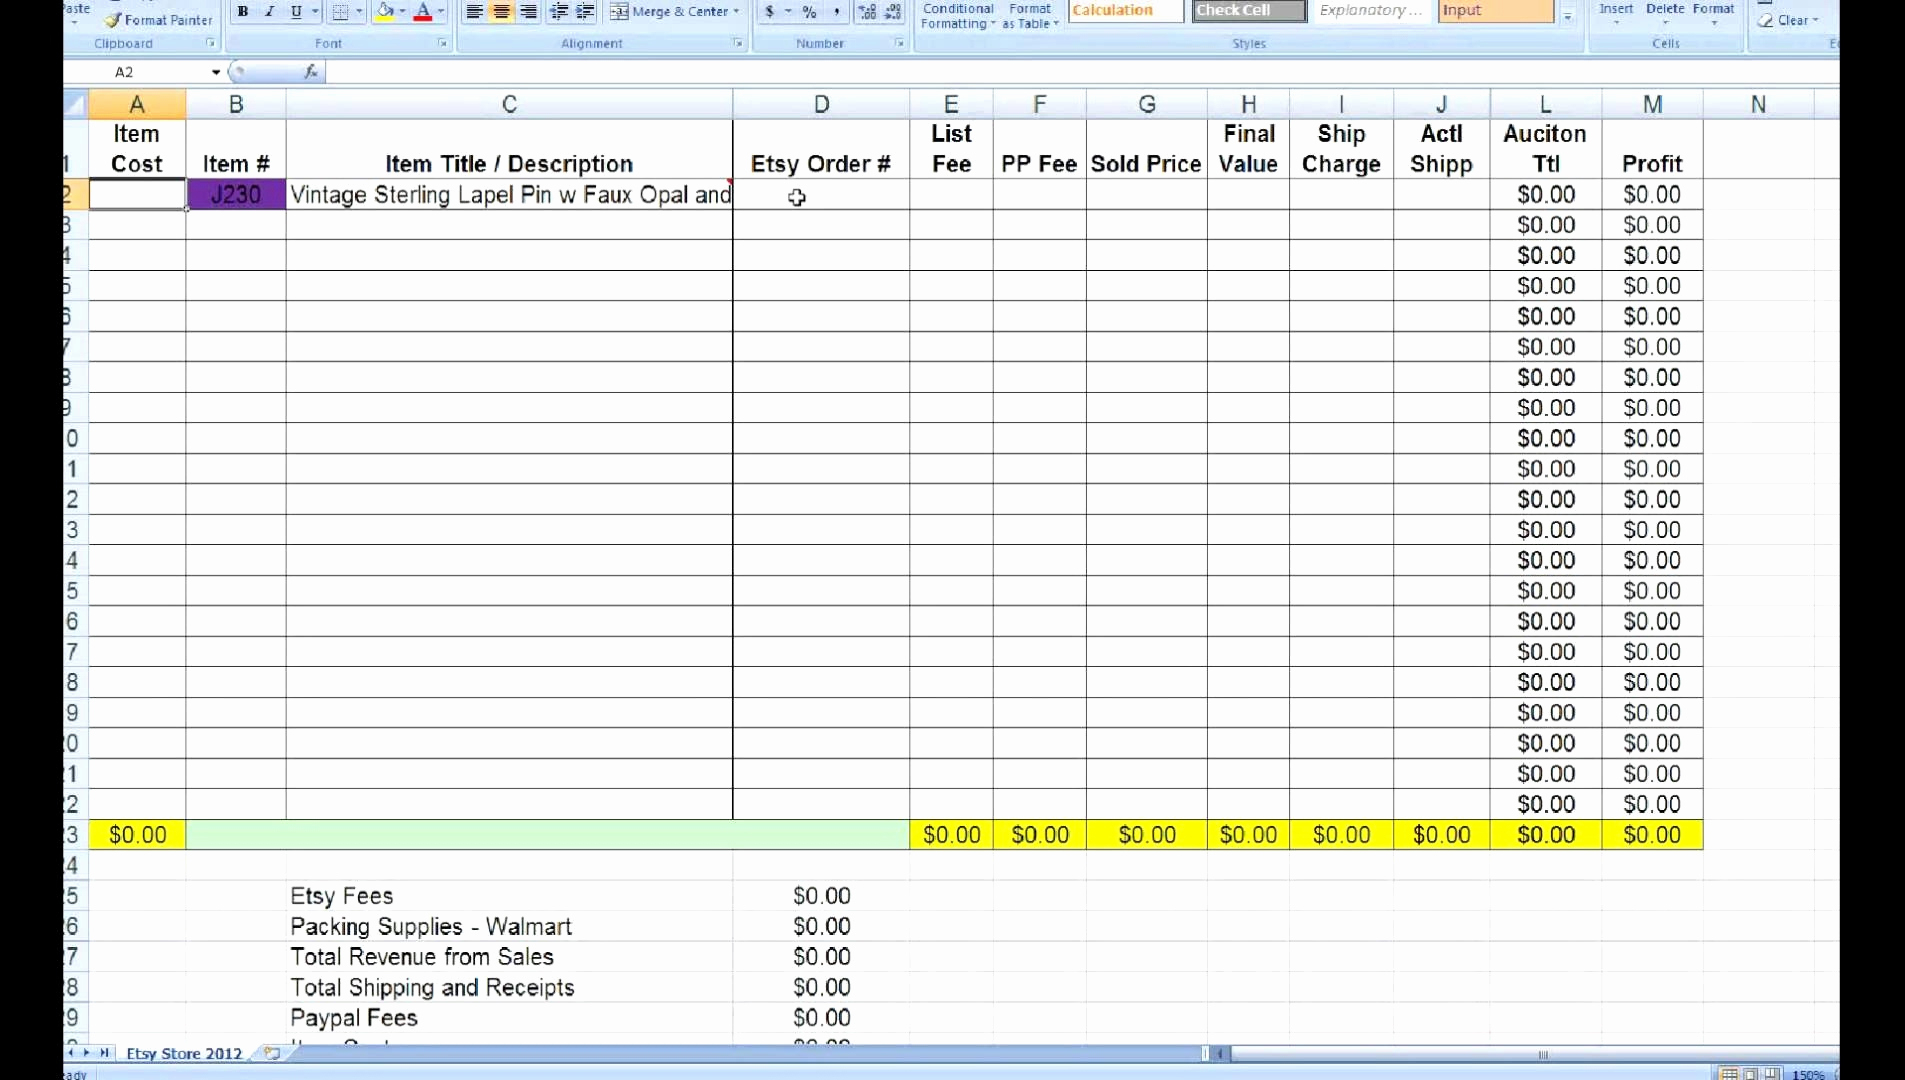 Quote Tracking Spreadsheet Fresh Insurance Sales Tracking throughout Retail Sales Tracking Spreadsheet